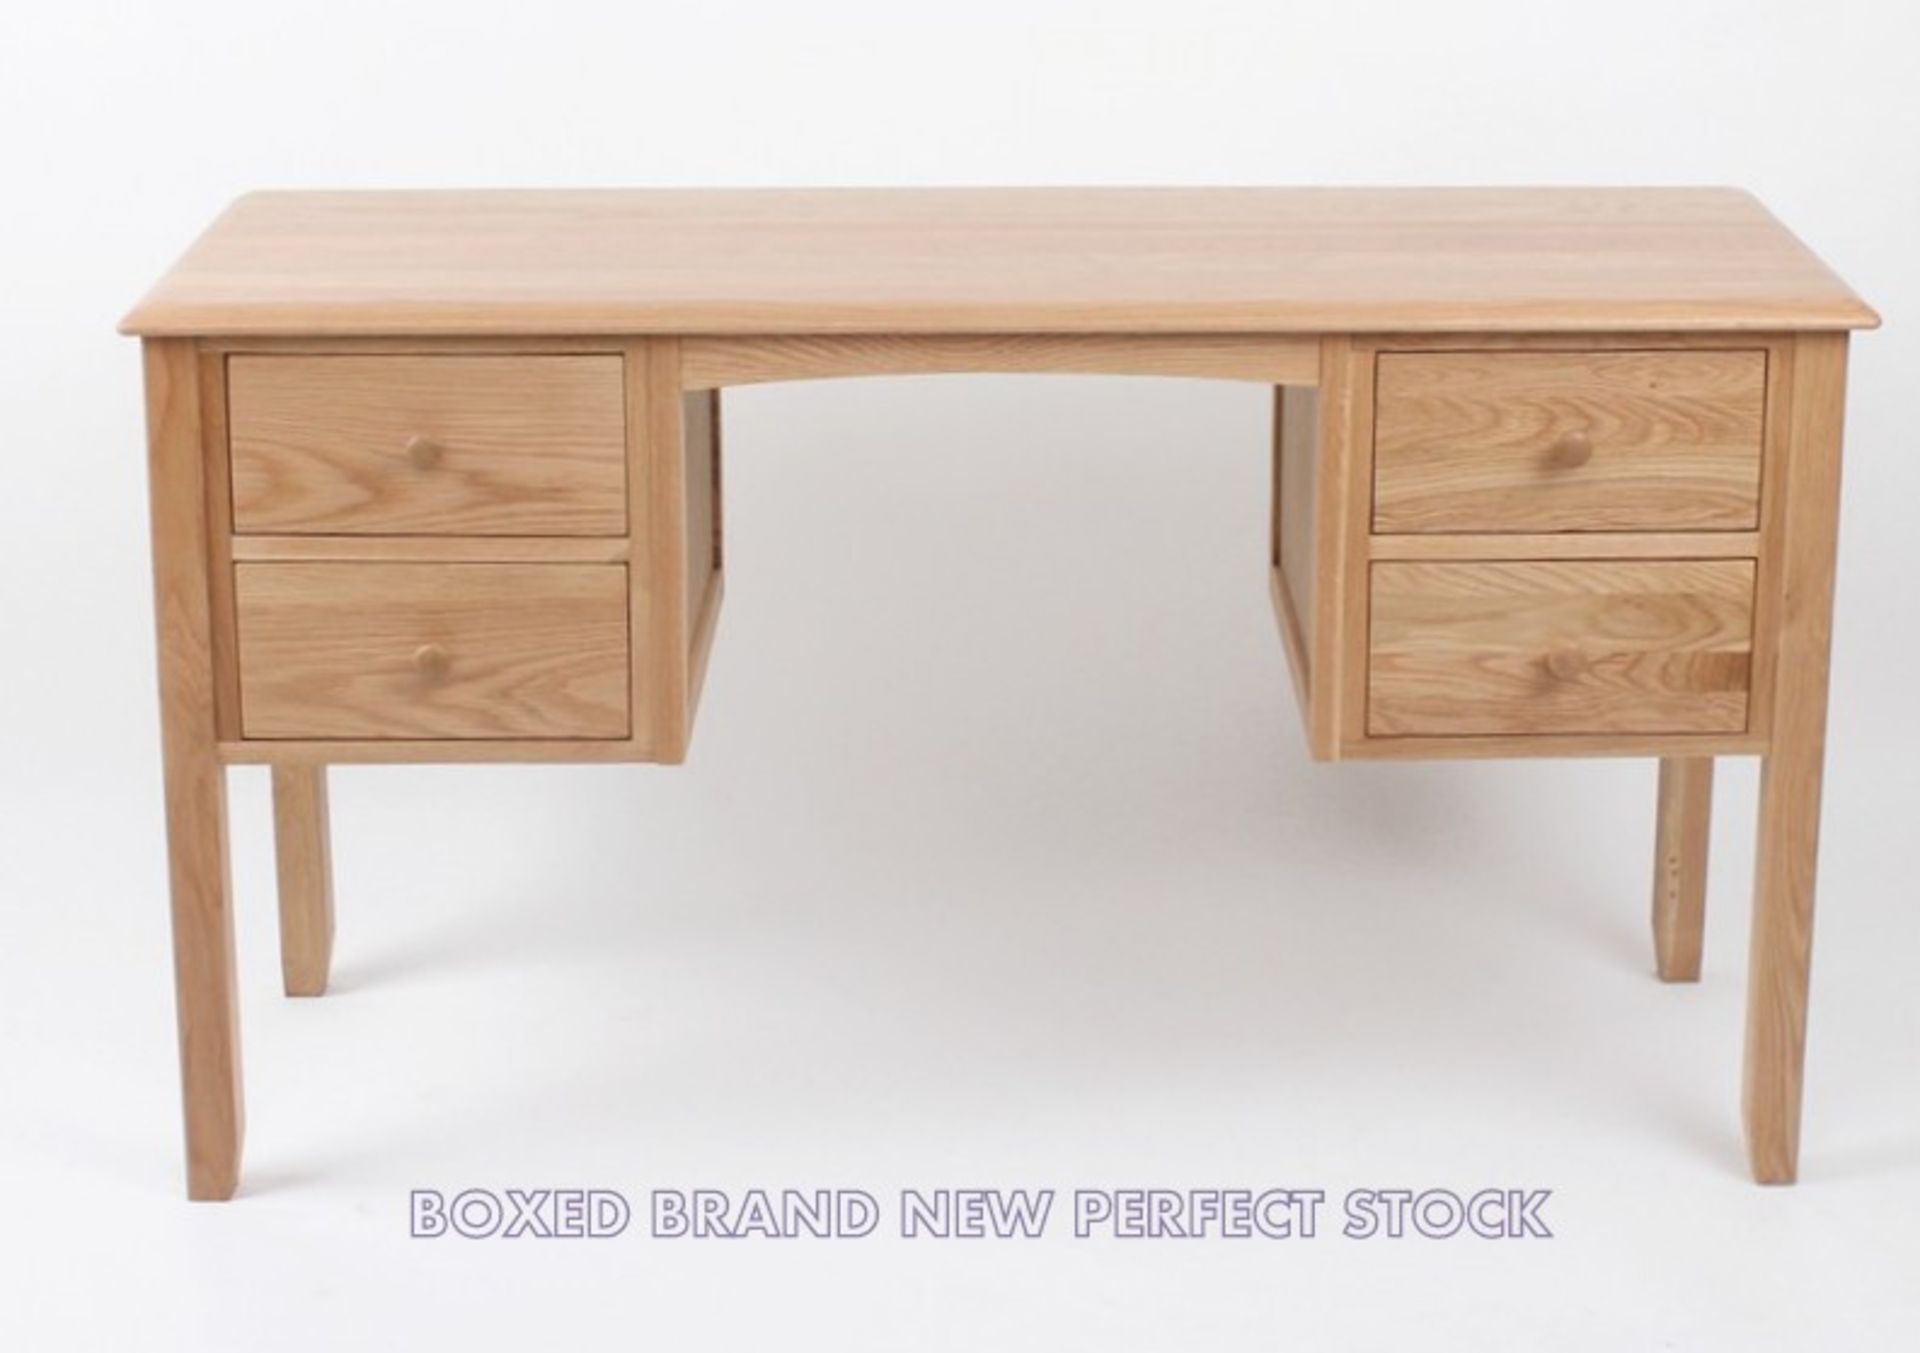 ONE BRAND NEW DRESSING TABLE SOLID OAK WITH VENEERED SIDE PANELS, DRAWER BOTTOMS AND BACK, 4 DRAWERS